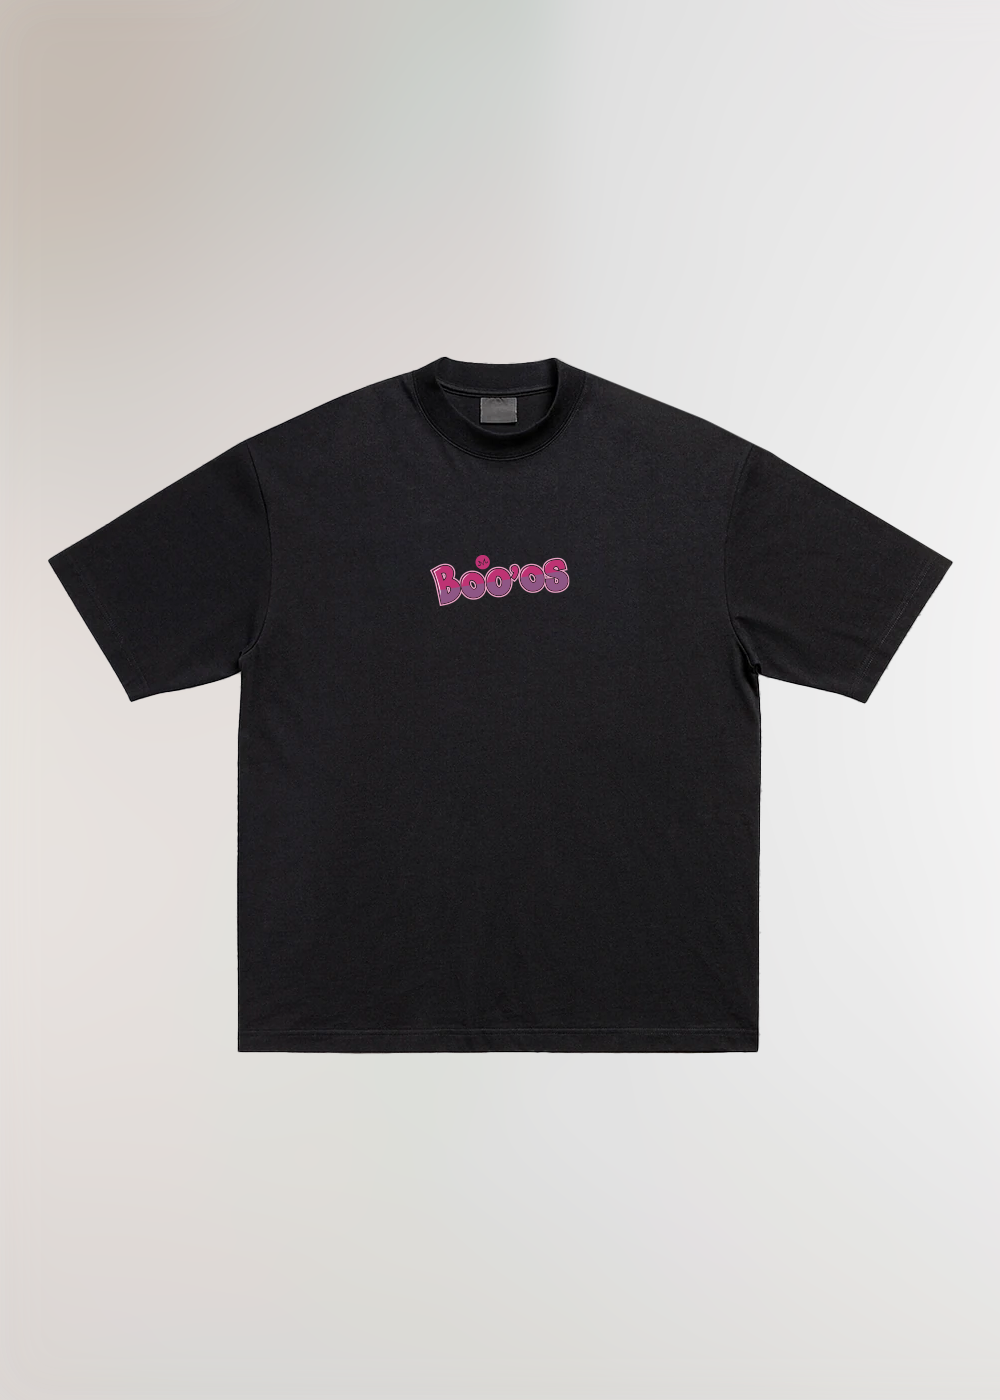 MADE IN JAPAN - BOO'OS® BLACK T-SHIRT